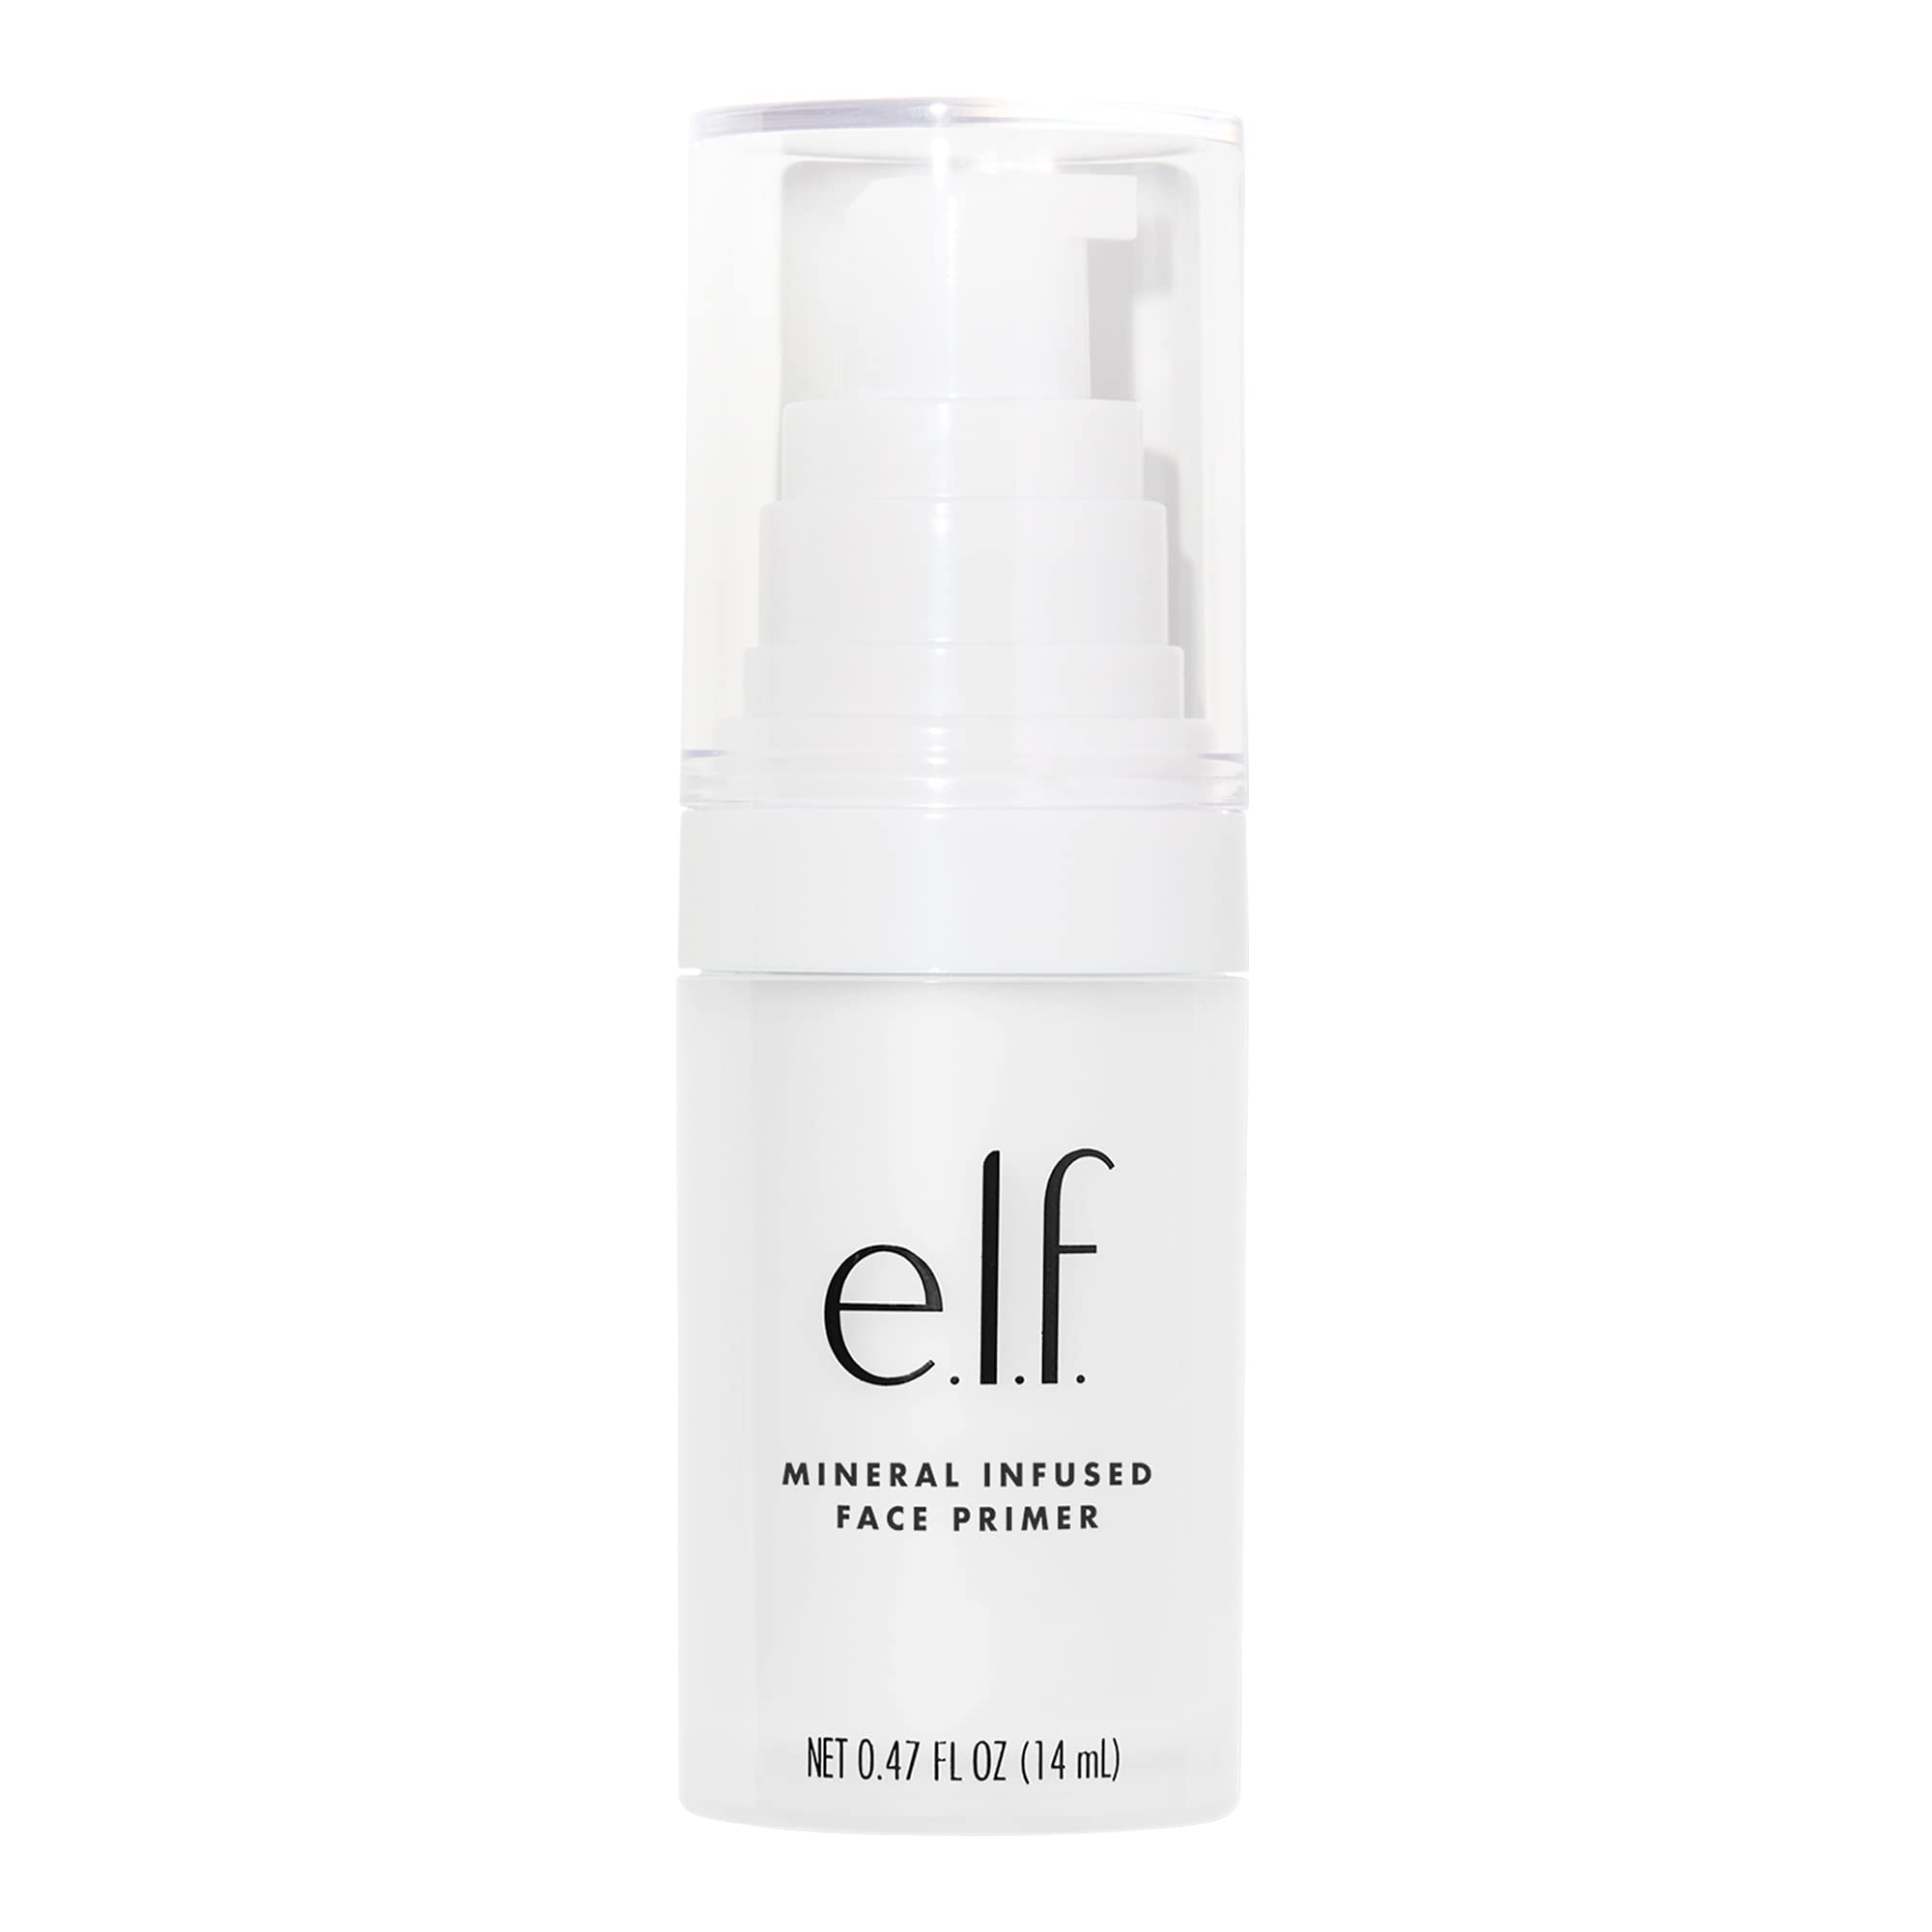 e.l.f. Mineral Infused Face Primer, Primer For A Smooth Foundation Base, Fills In Fine Lines & Refines Complexion, Vegan & Cruelty-free, Small